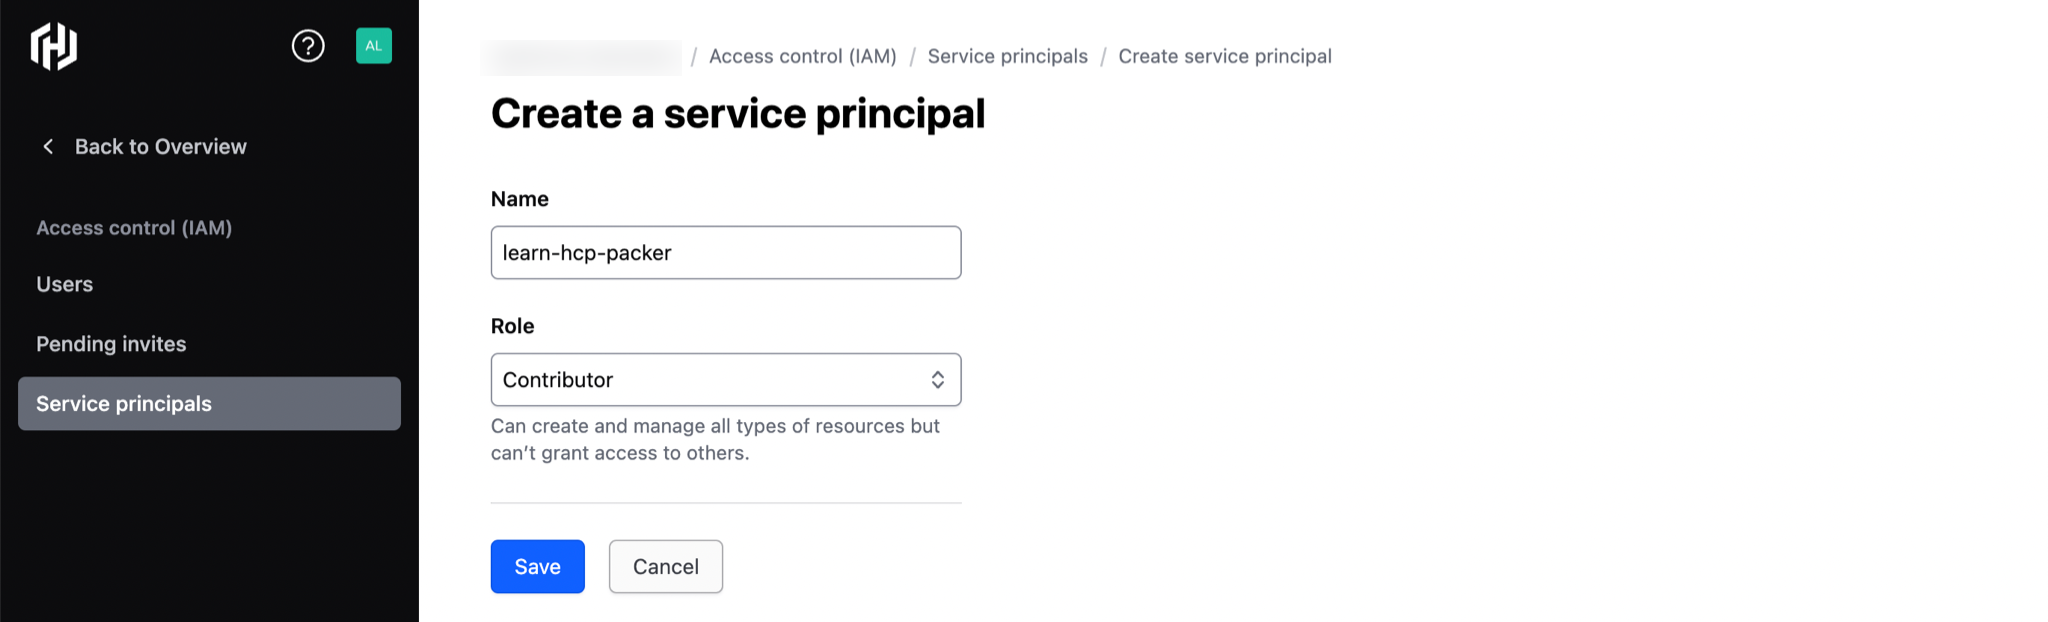 Create service principal form with learn-hcp-packer in Name field and contributor selected in Role field